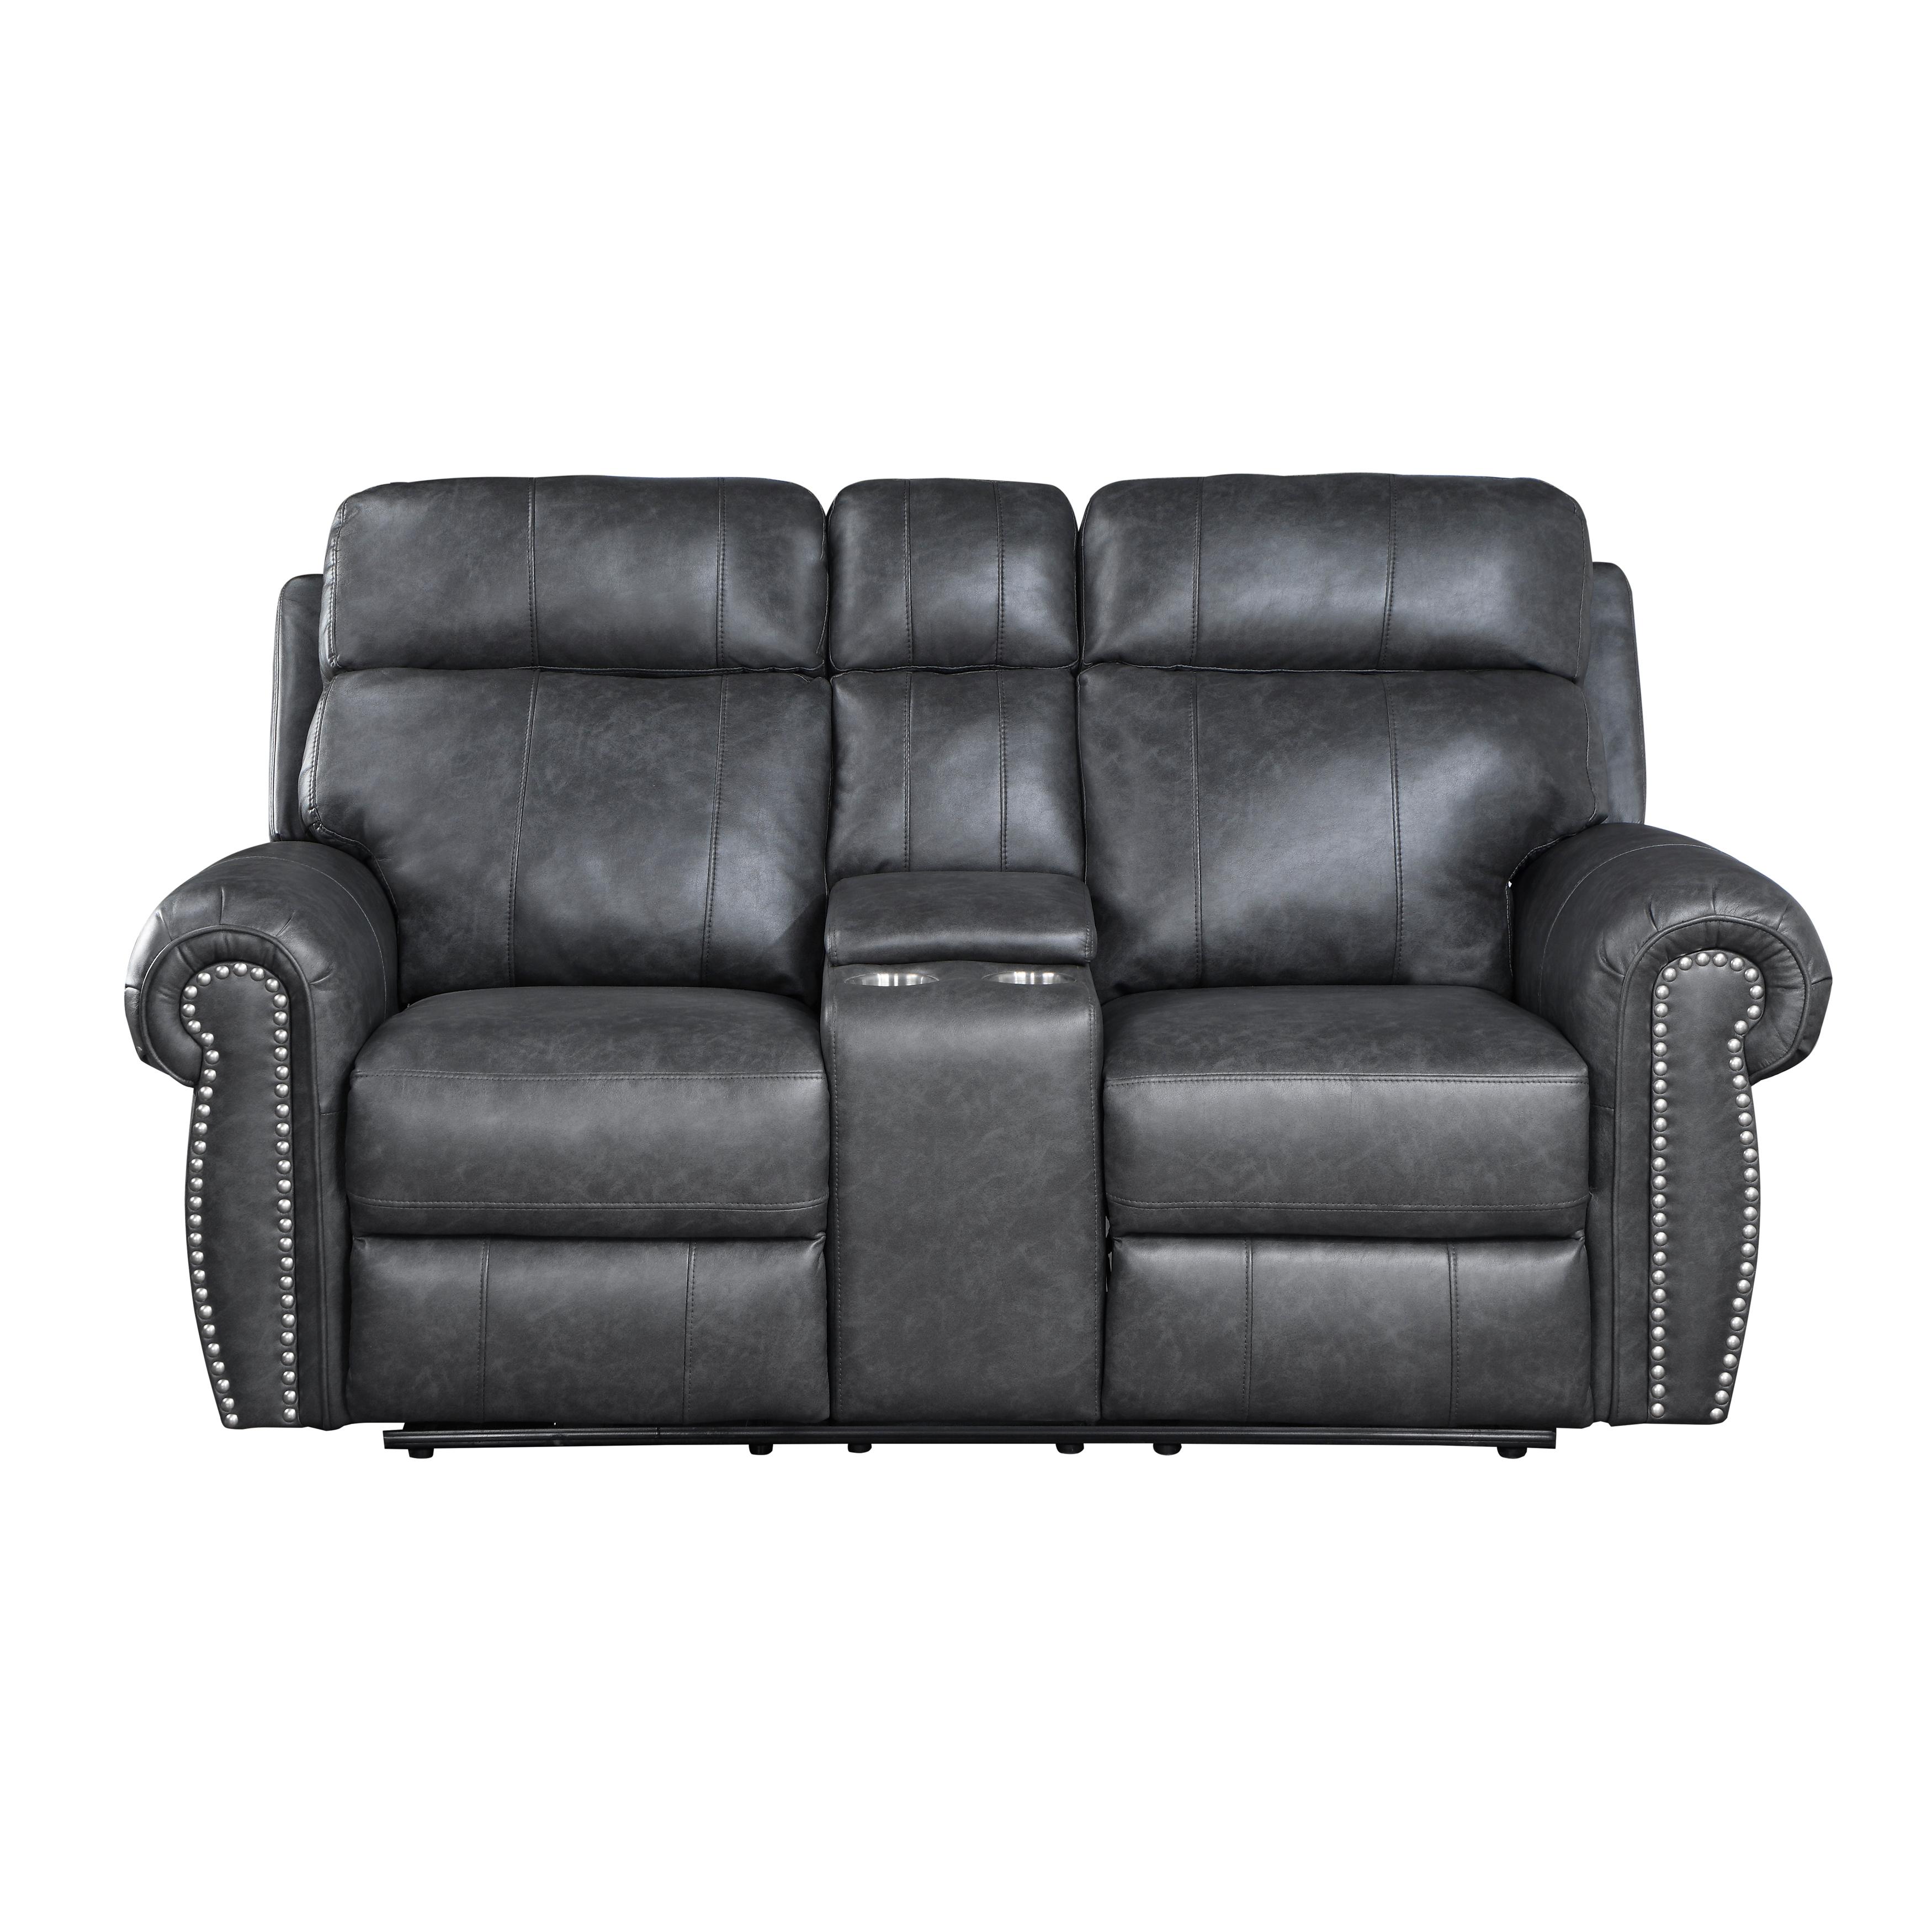 Homelegance 9488GY-2PW Granville Power Reclining Loveseat